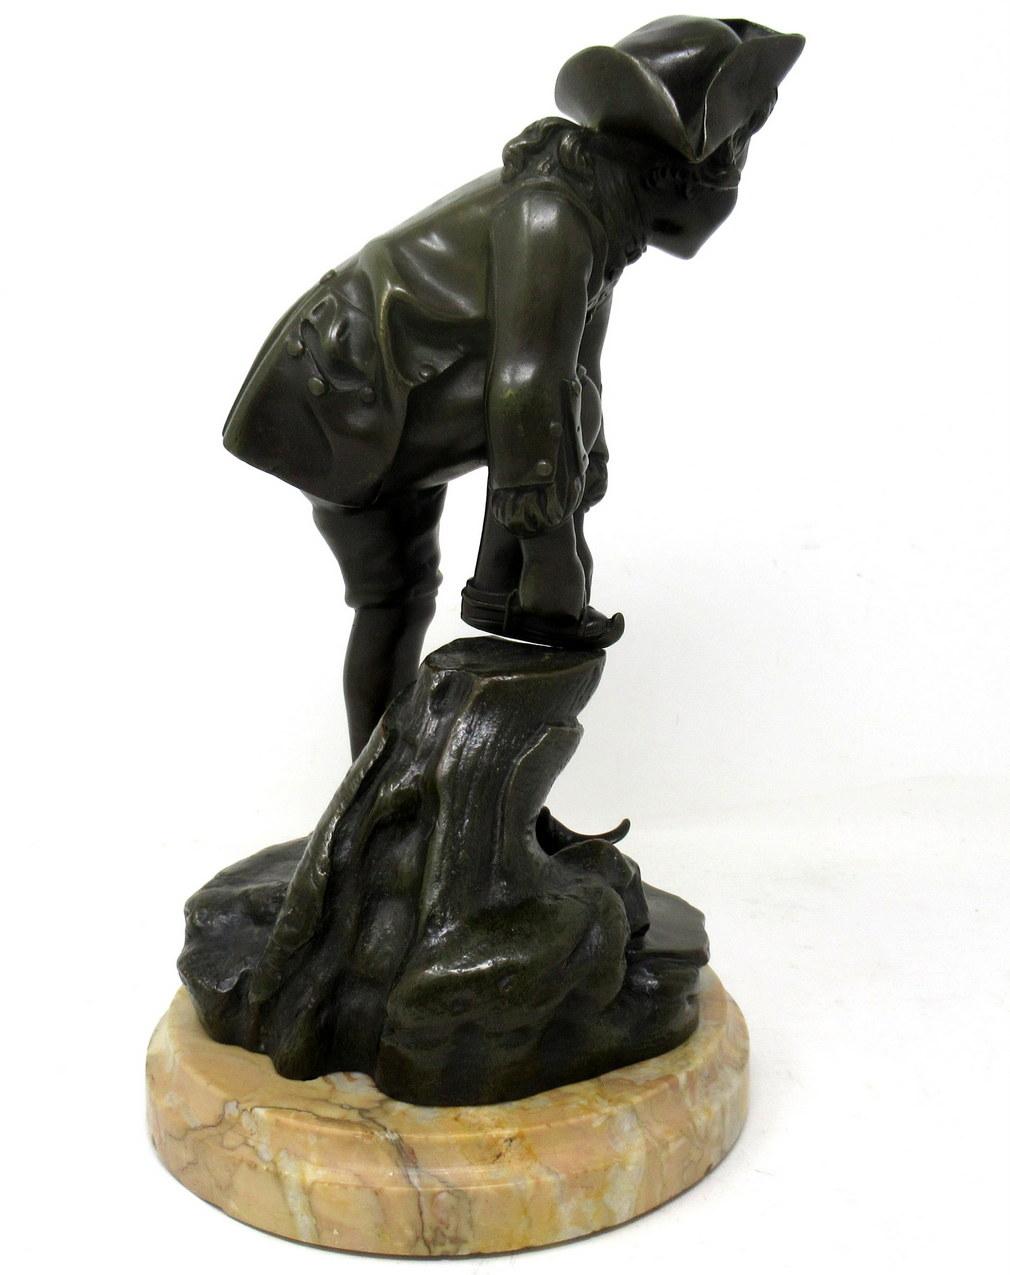 Antique French Bronze Figure Male Ice Skater Sienna Marble, 19th Century In Good Condition For Sale In Dublin, Ireland